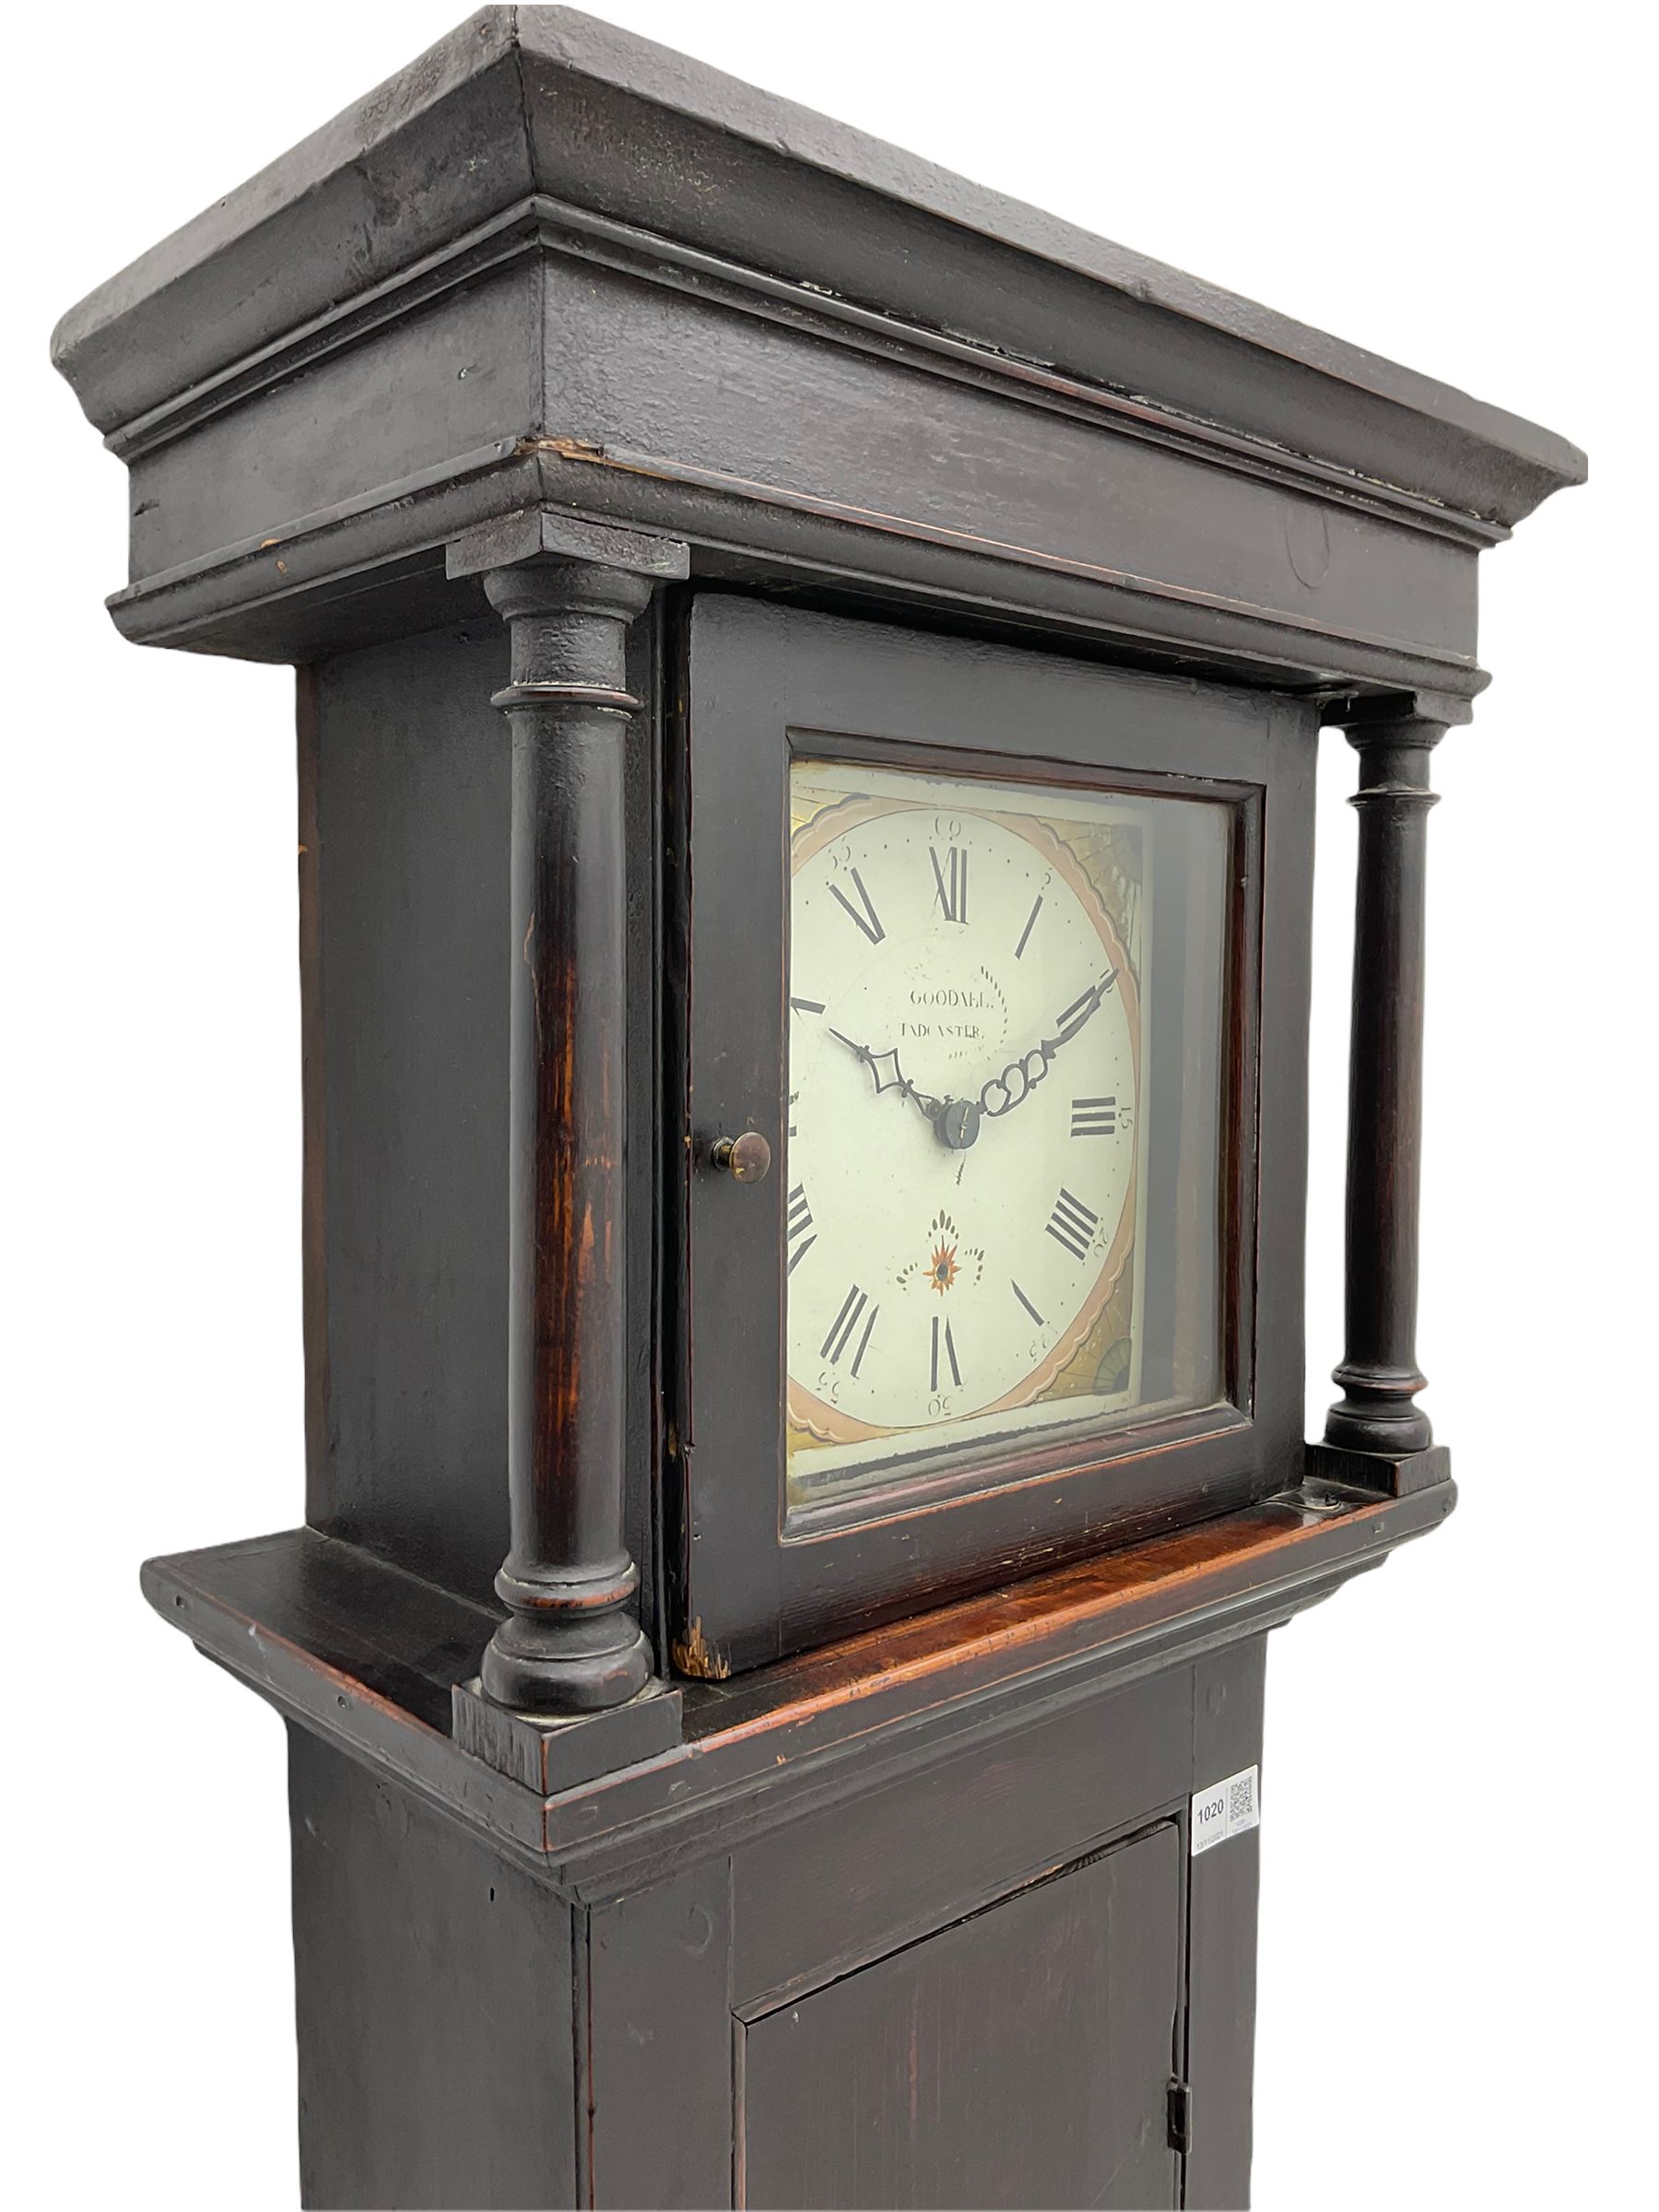 A provincial 30-hour chain driven longcase clock in an oak finished case with a flat top and wide co - Image 4 of 7